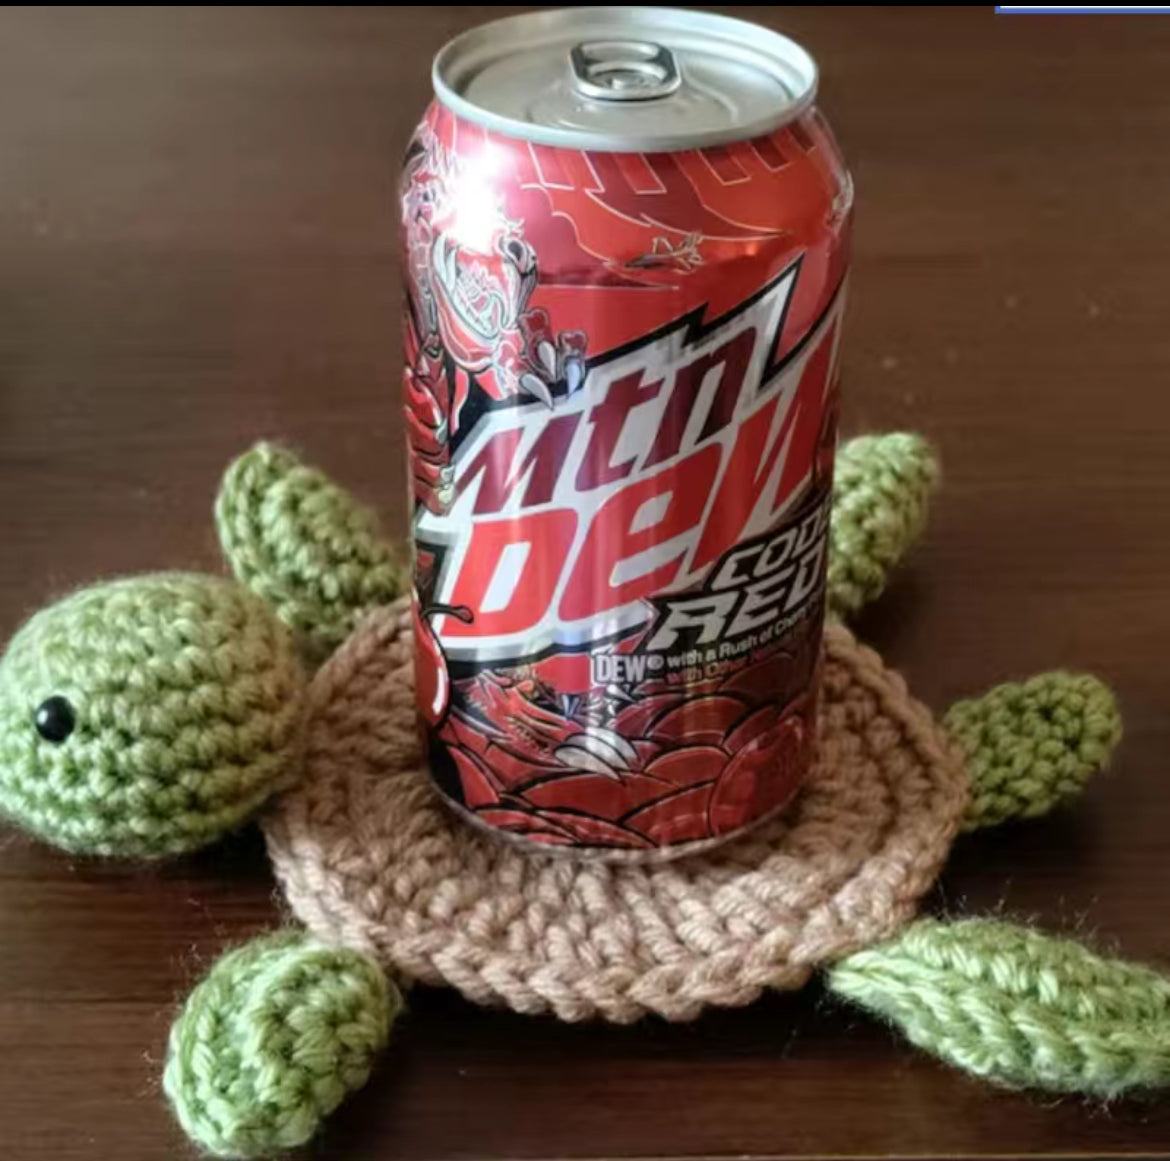 1pc, Coaster, Cute Turtle or Lamb, Hand Knitted